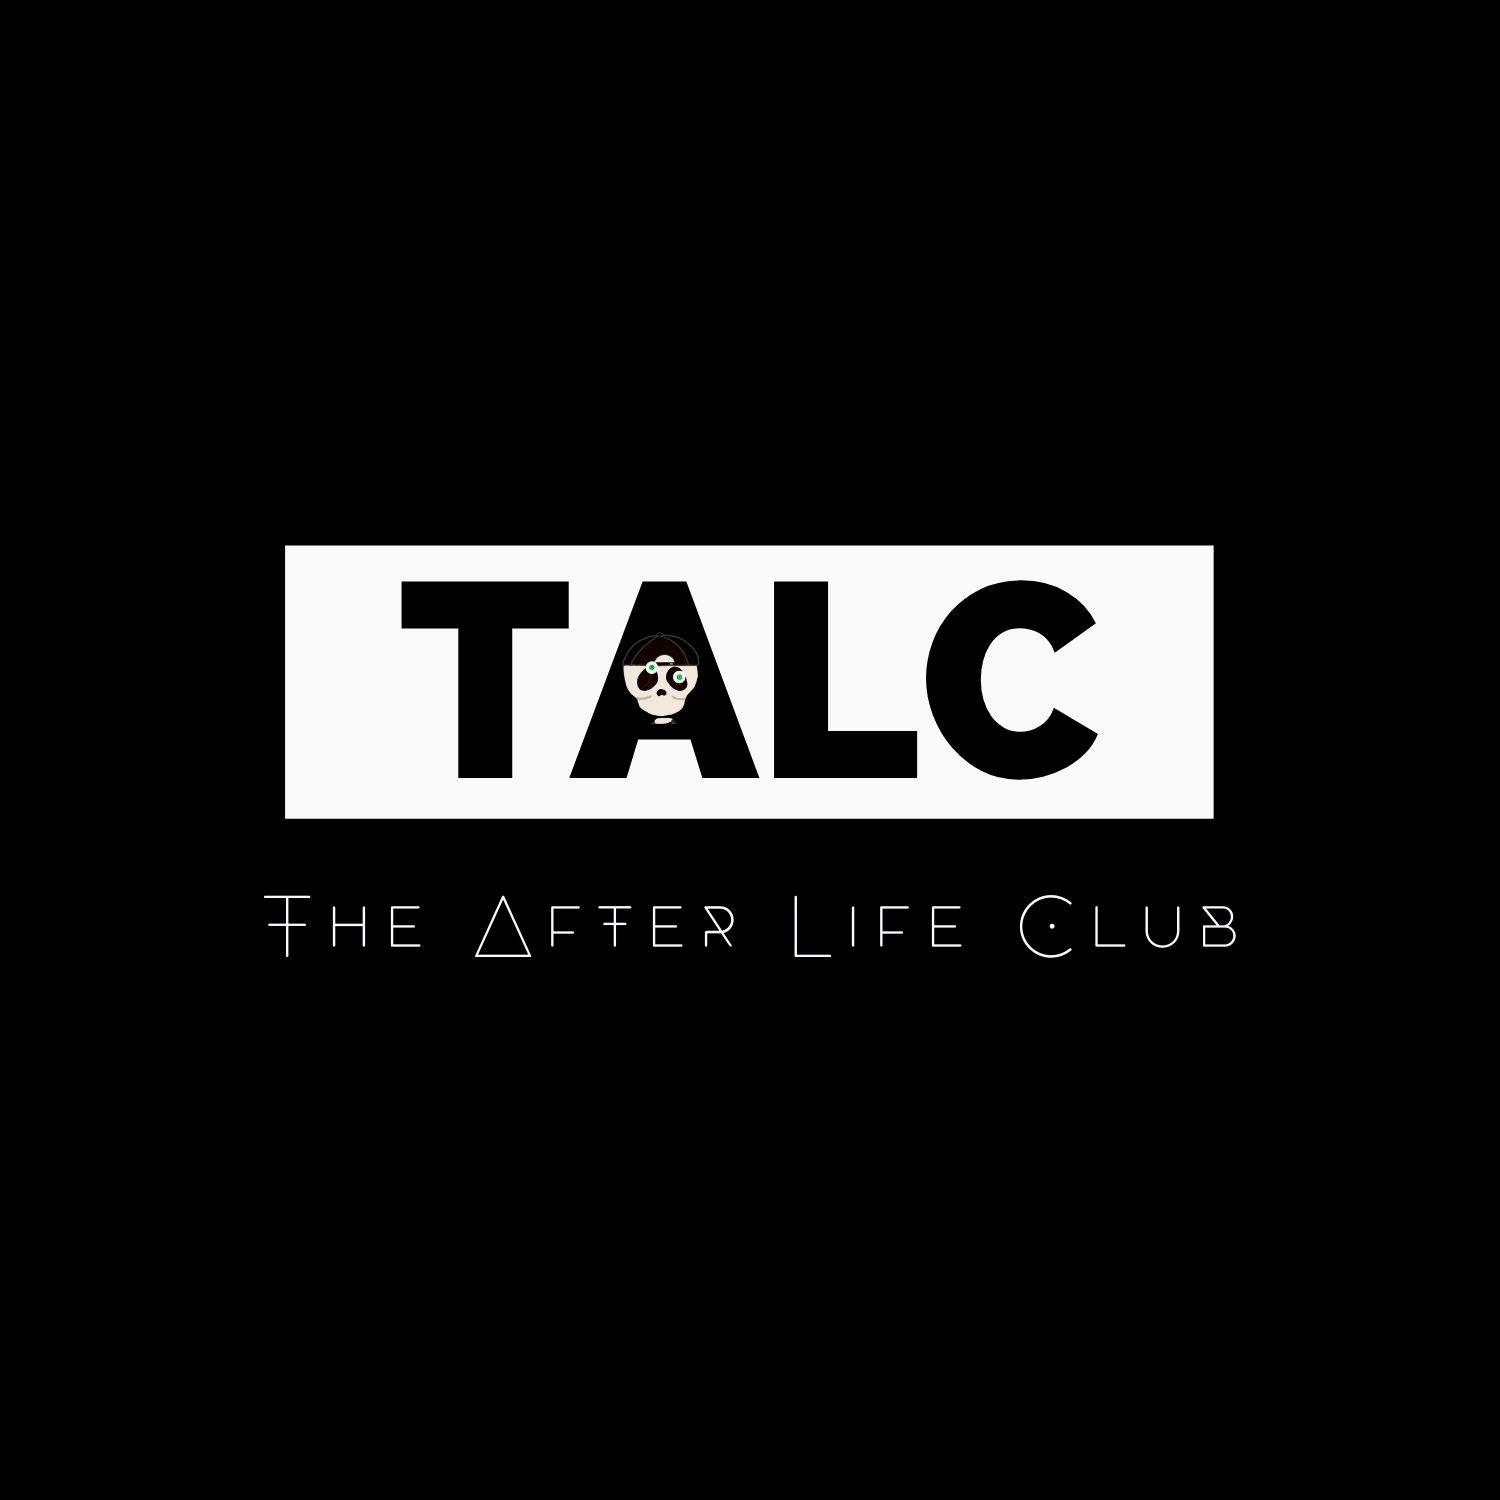 The After Life Club